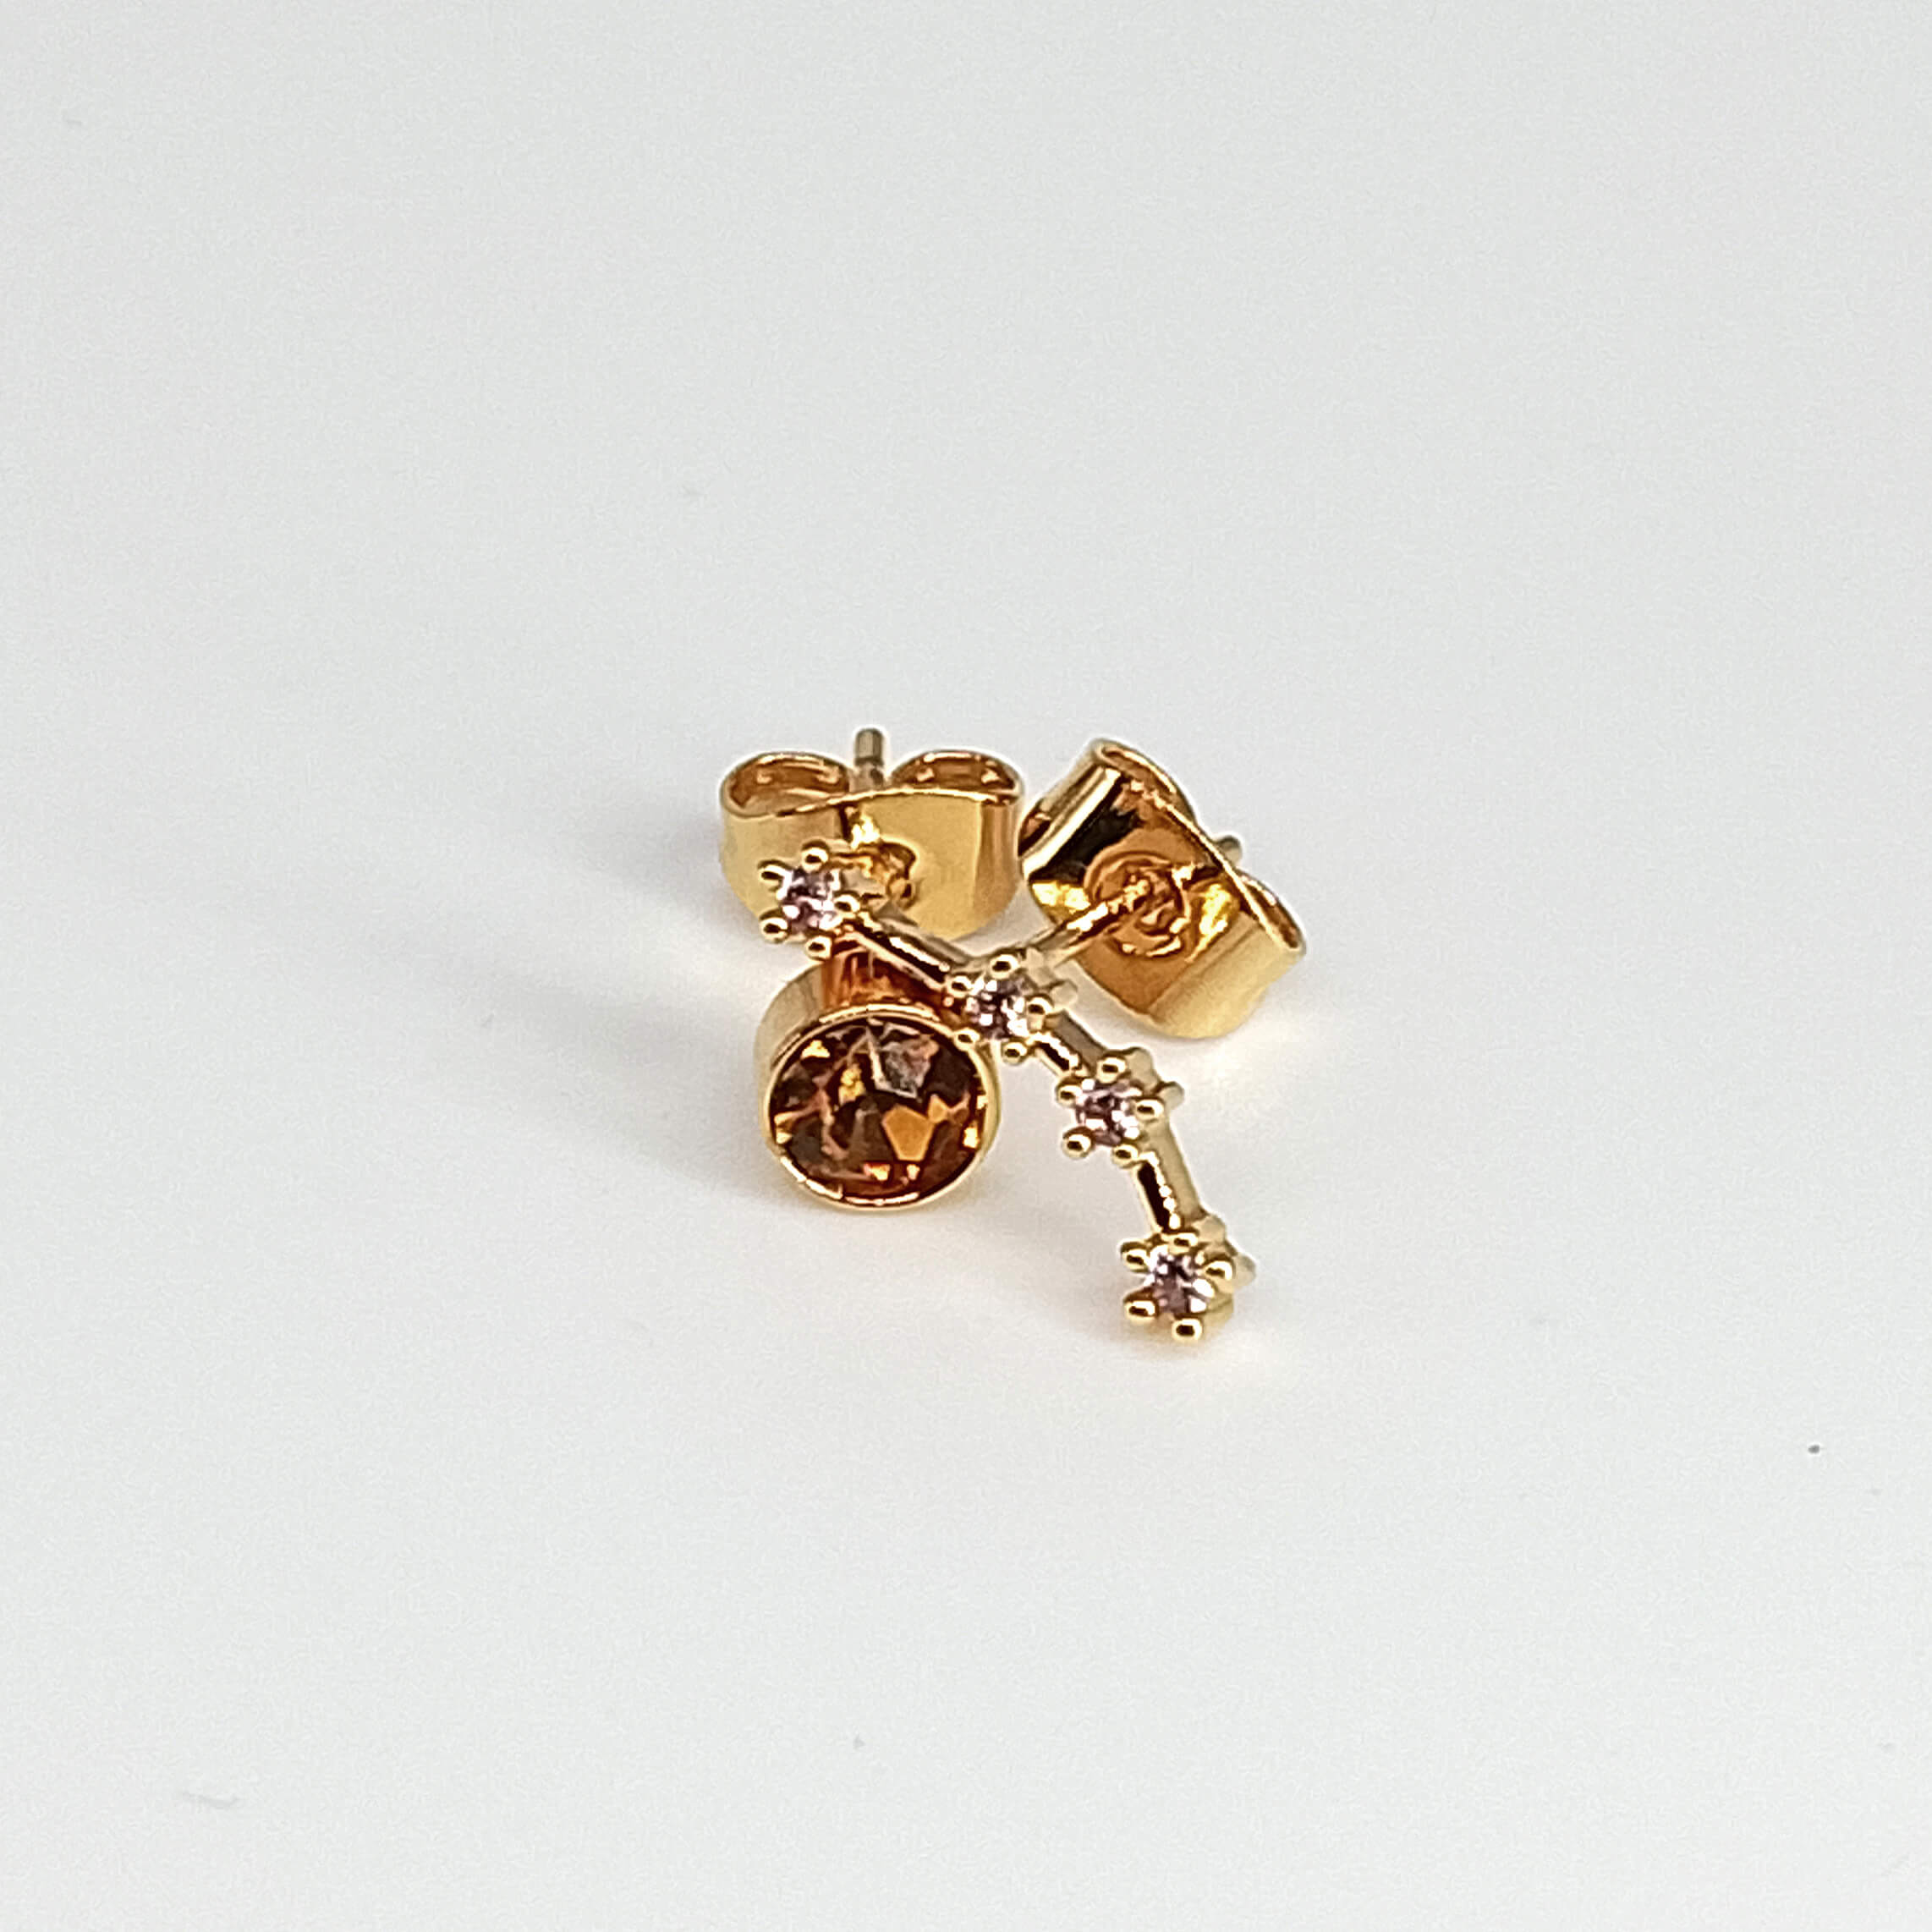 Aries Constellation Earrings - 24K Gold Plated with Citrine